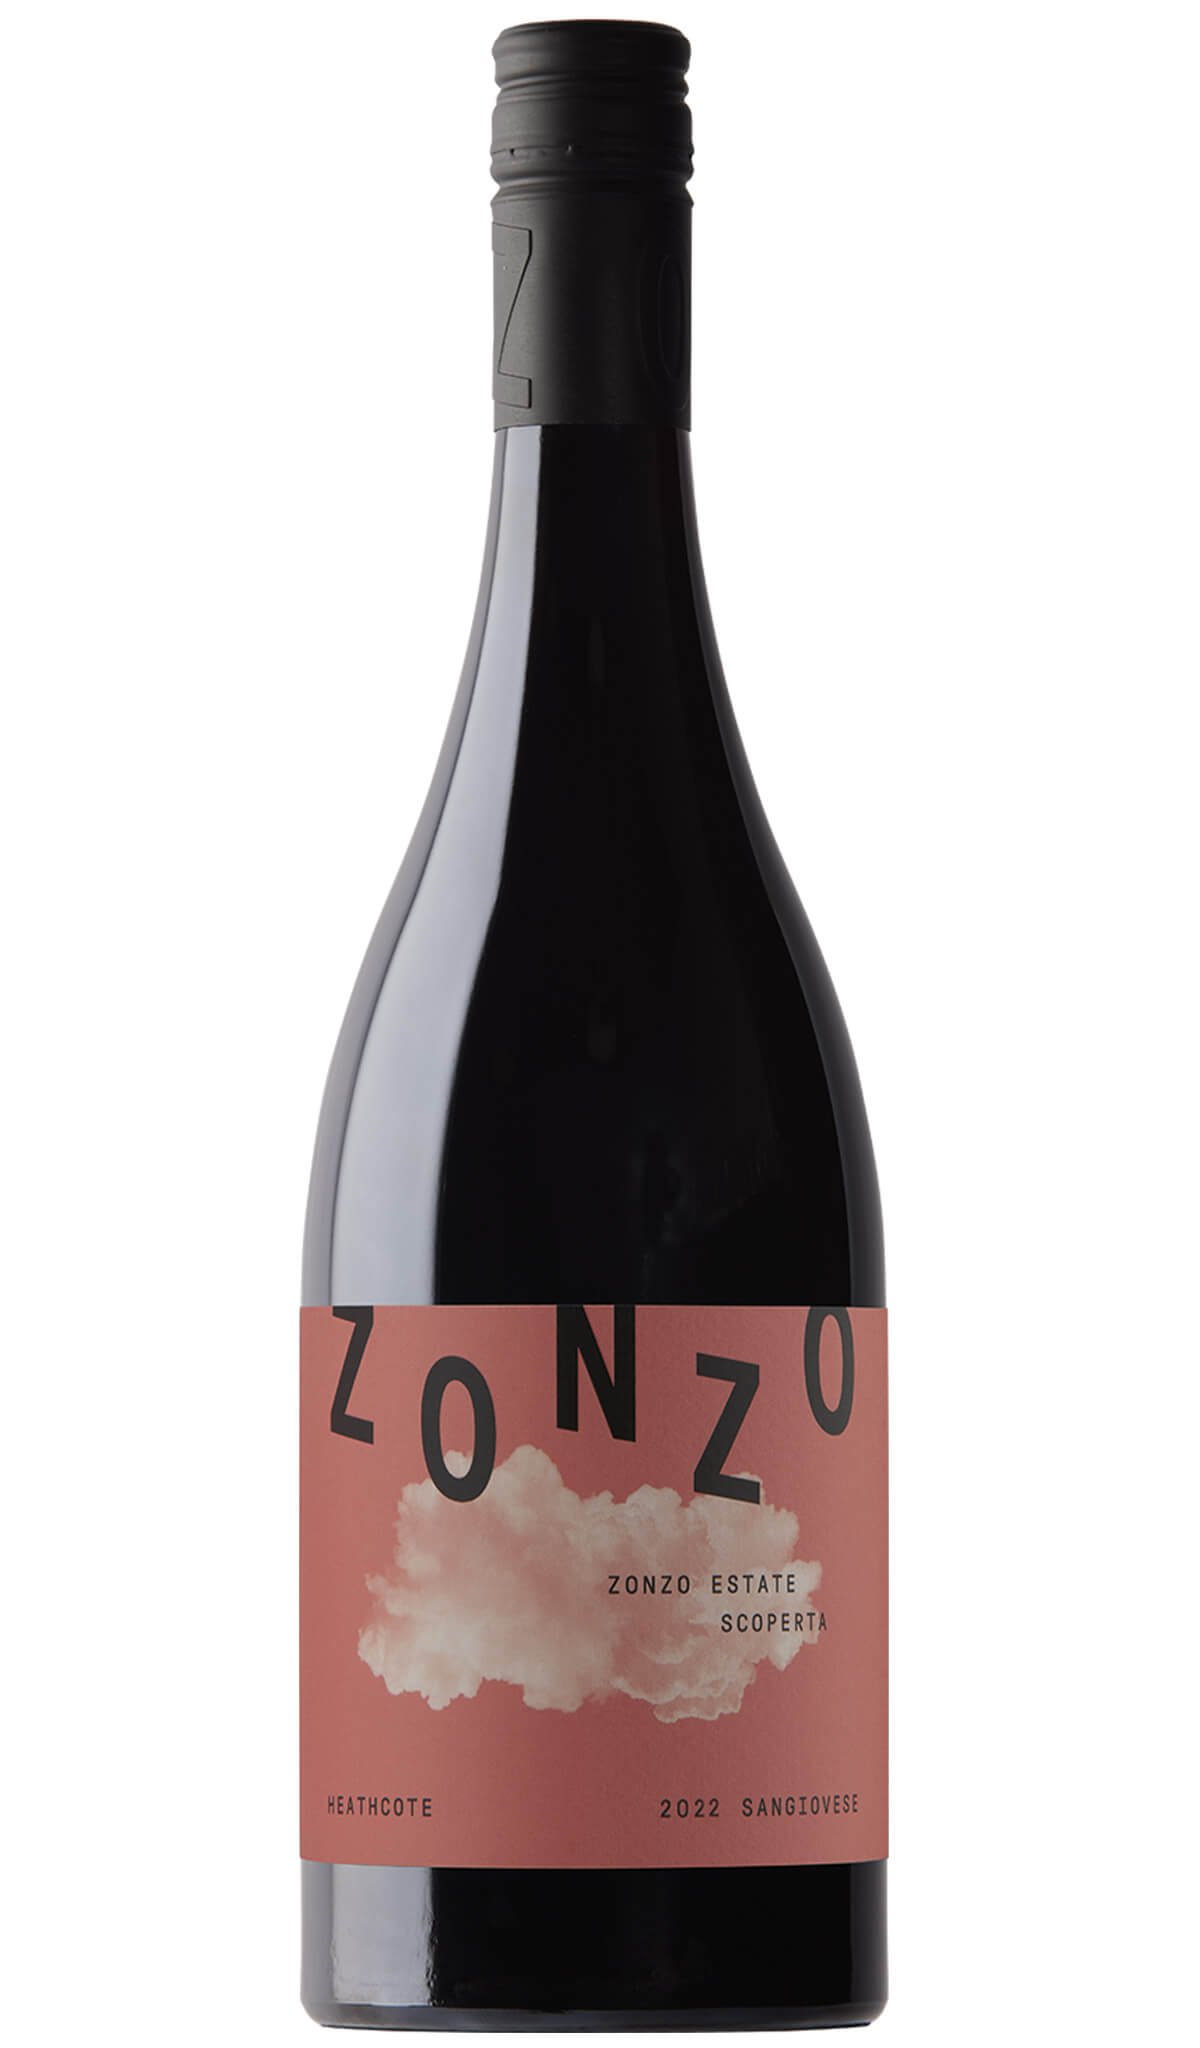 Find out more, explore the range and purchase Zonzo Estate Scoperta Sangiovese 2022 (Heathcote) available online at Wine Sellers Direct - Australia's independent liquor specialists.